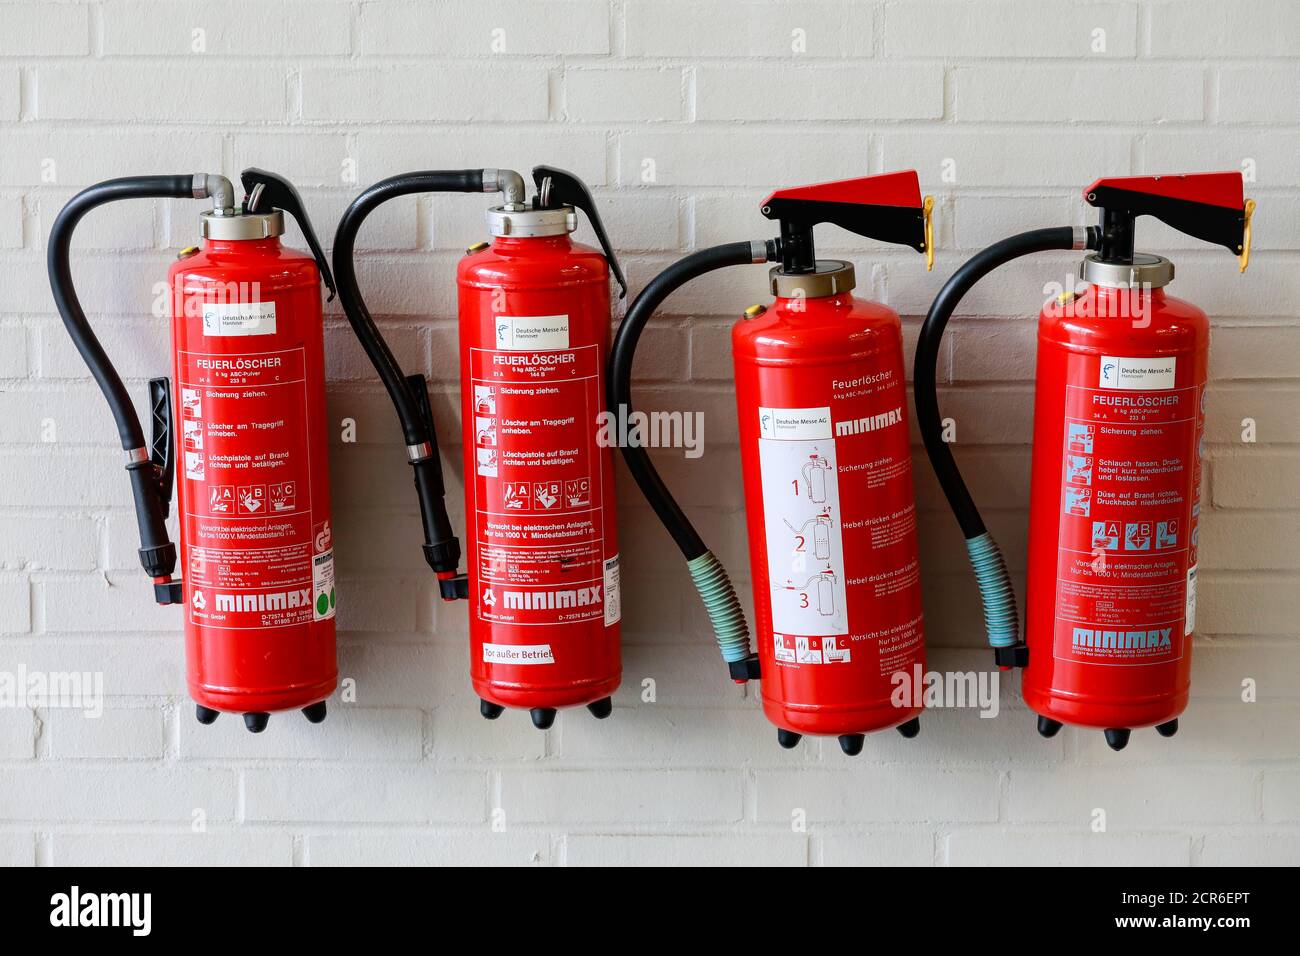 Hannover, Lower Saxony, Germany - Four red fire extinguishers on a wall at the Hannover Messe. Stock Photo